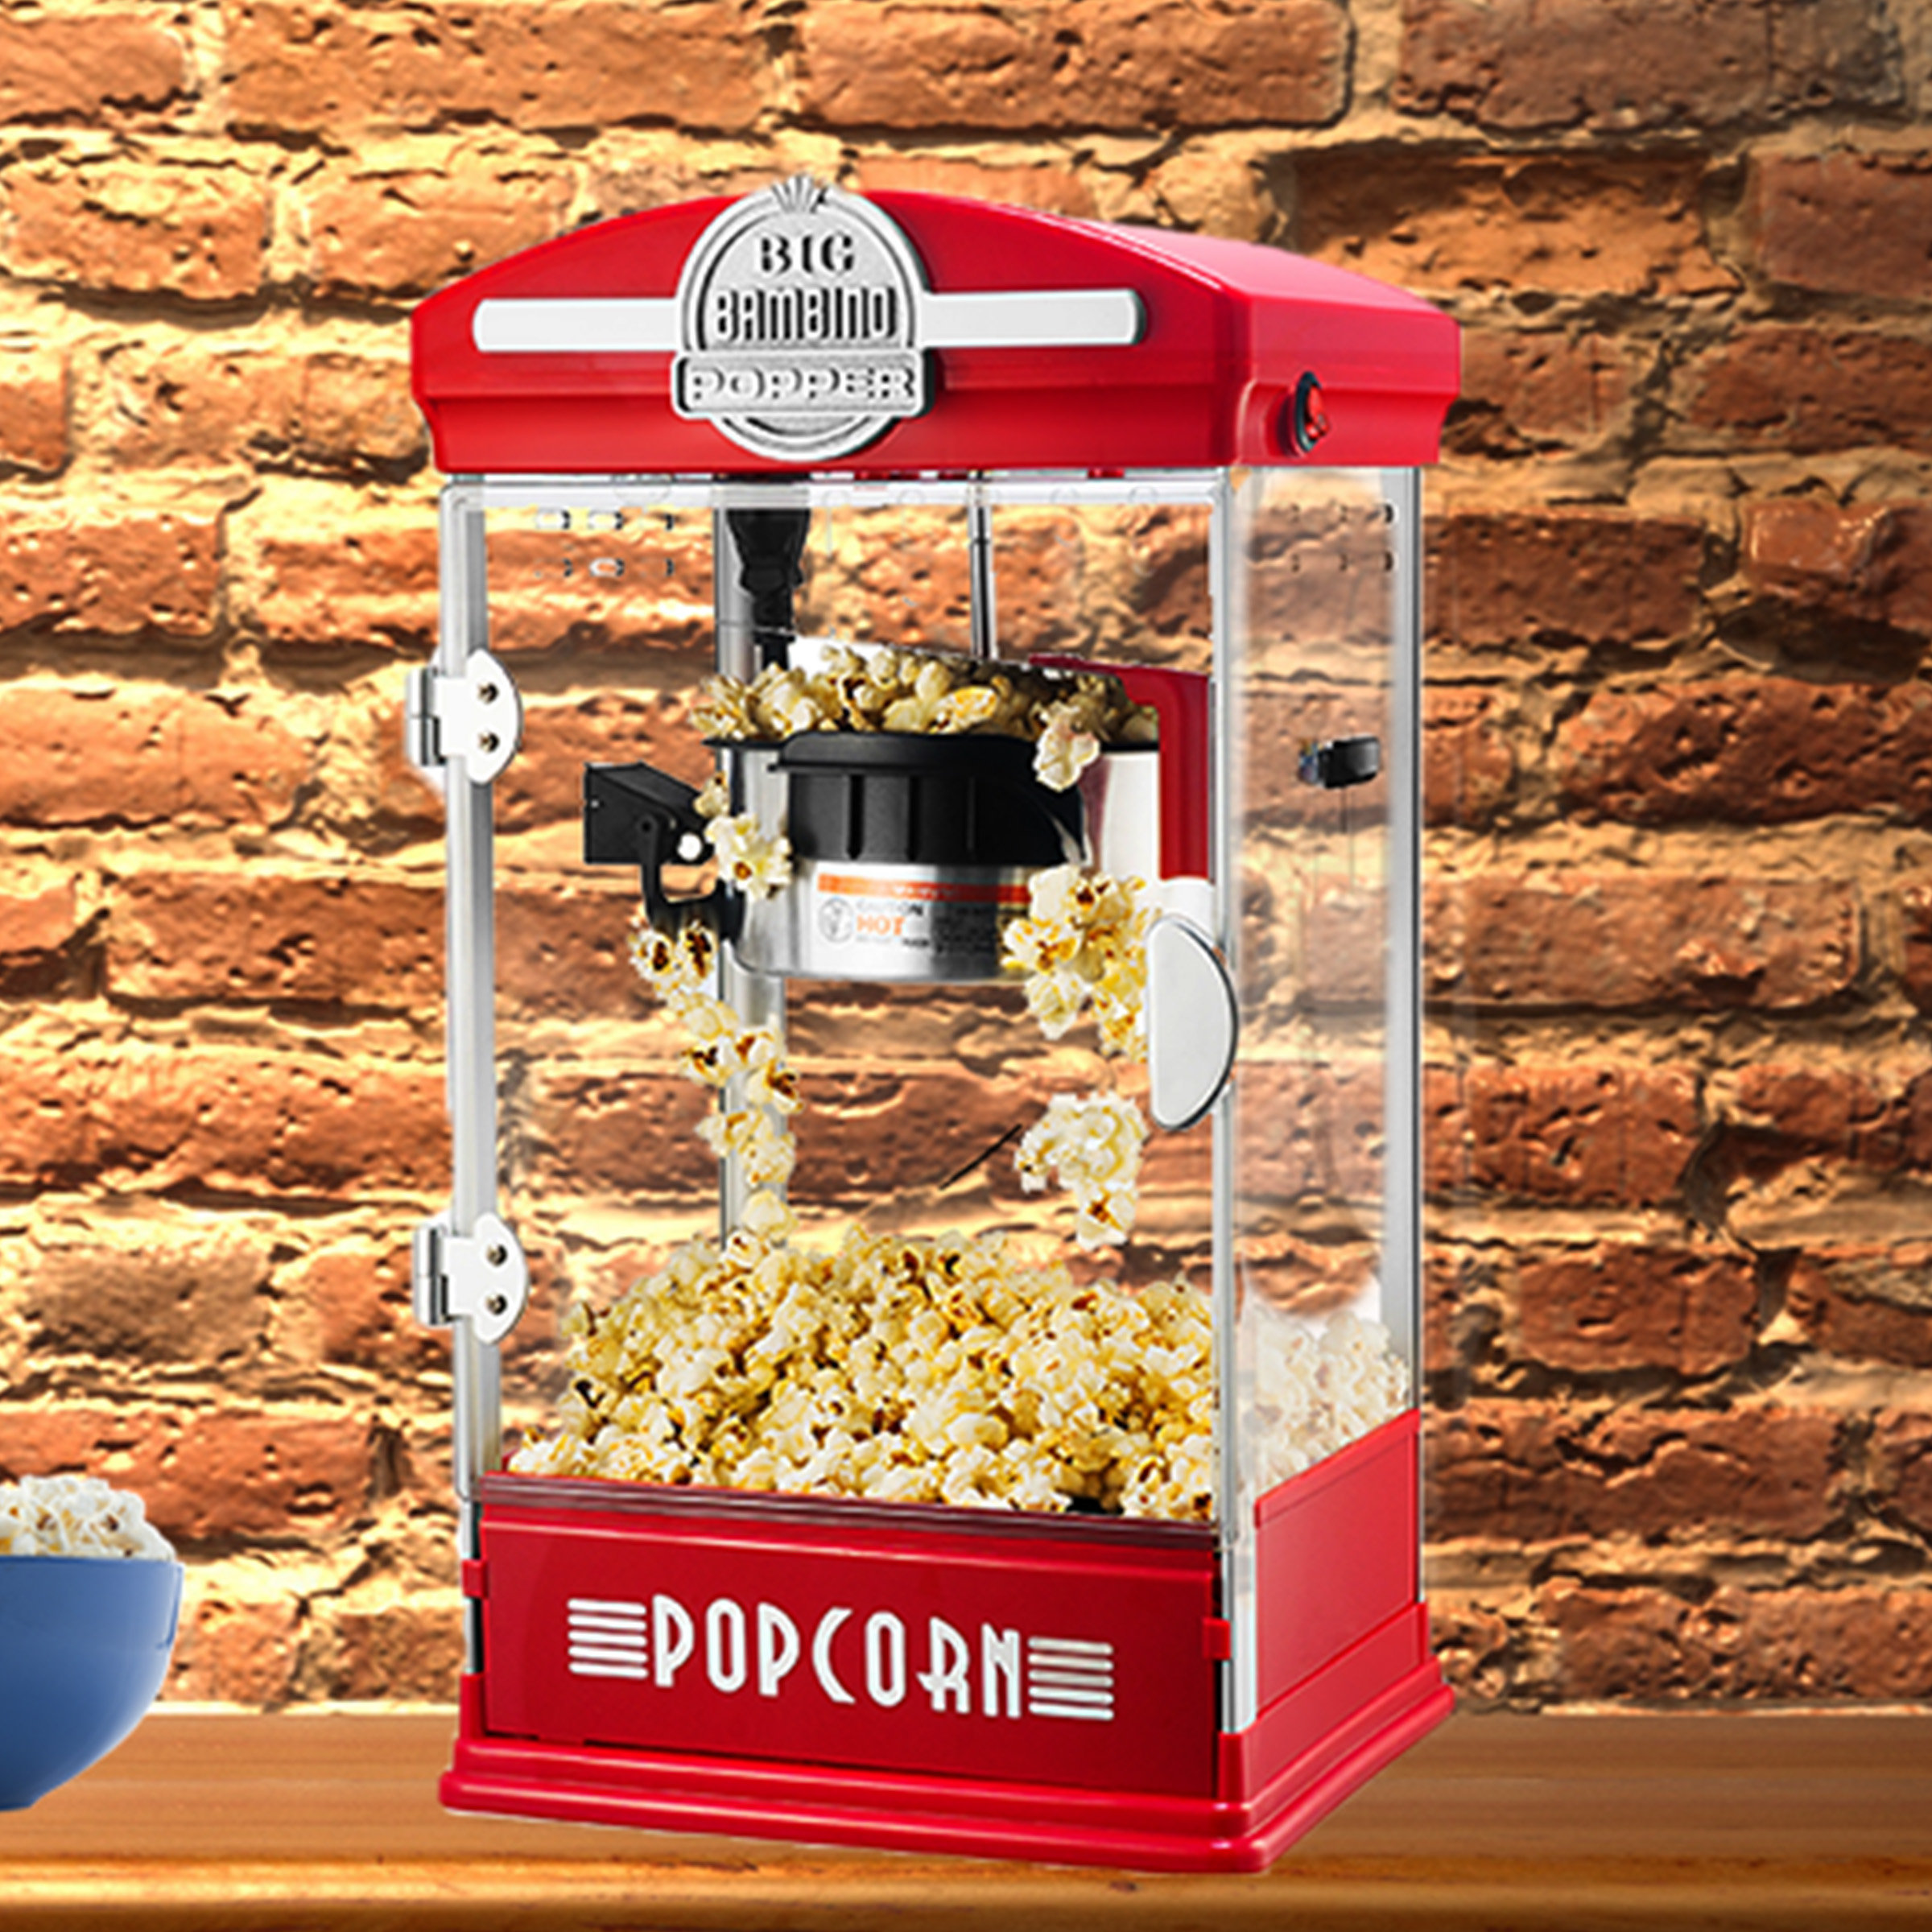 Olde Midway Movie Theater-Style Popcorn Machine Popper with Cart and 8 oz Kettle, Cream